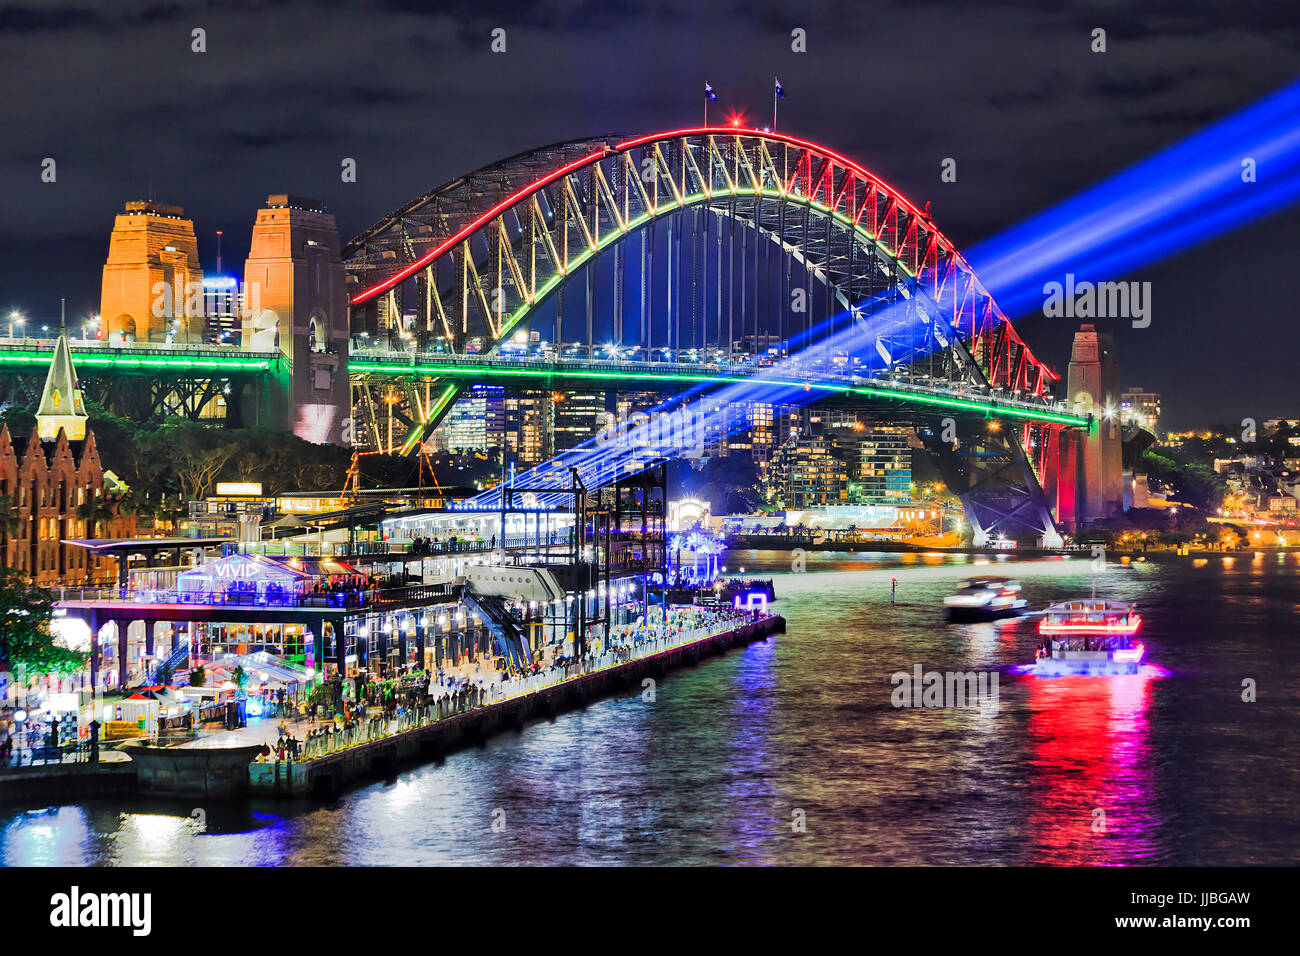 Sydney harbour bridge brightly illuminated and sending blue beams of projector light during Vivid Sydney light and ideas show in Sydney CBD as seen fr Stock Photo